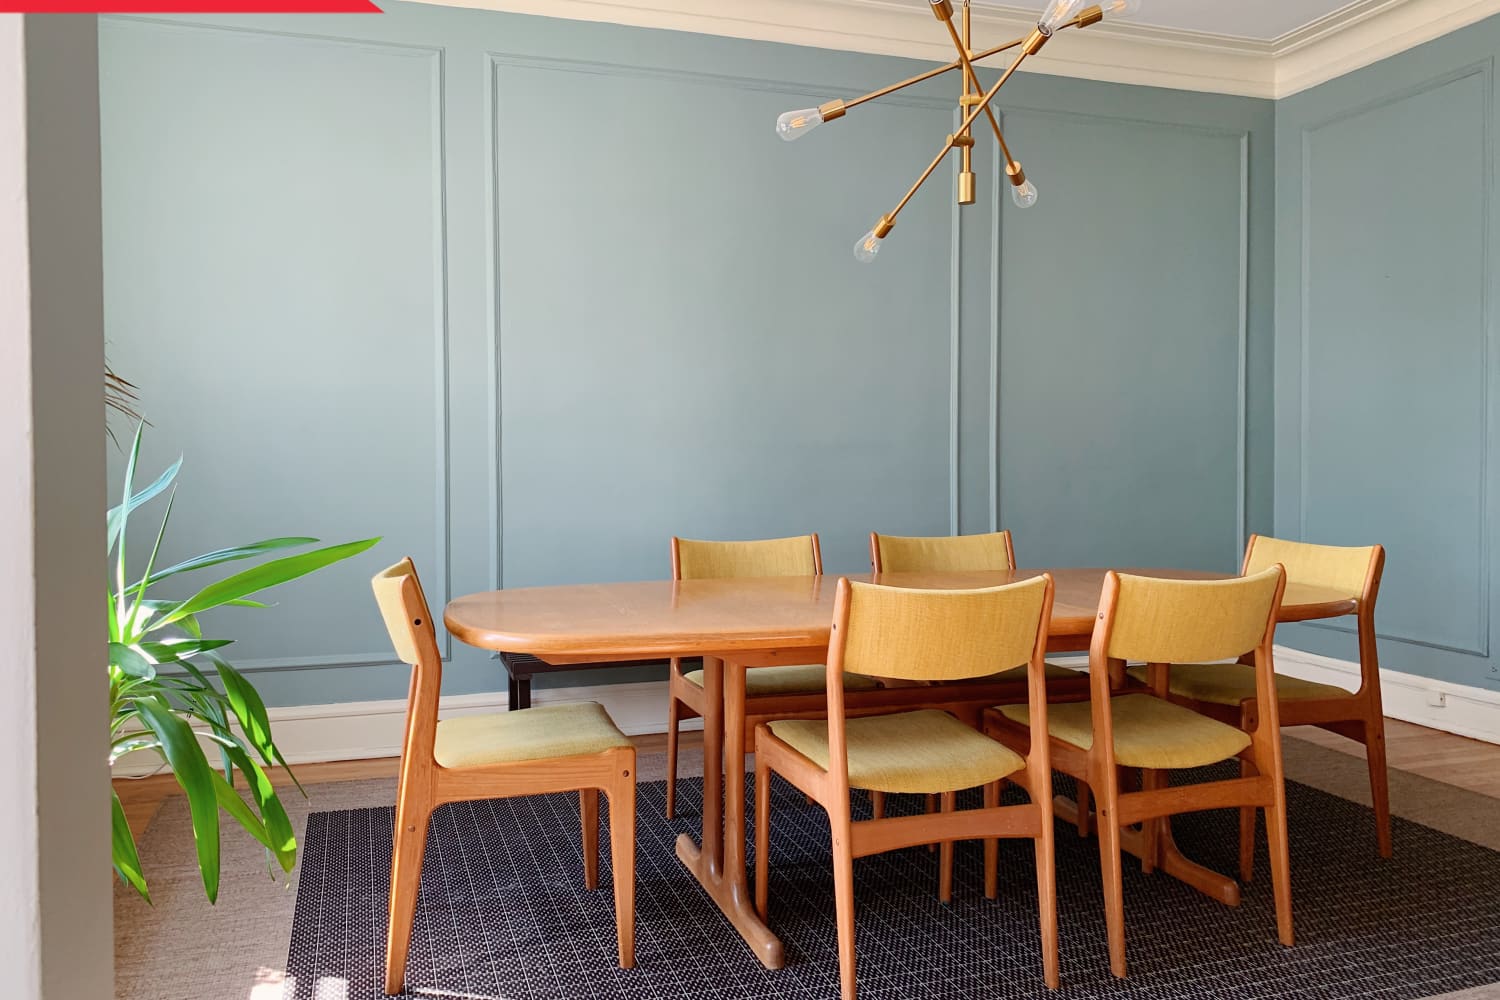 Download Before and After: A No-Reno Project Fills This 1920s Dining Room with Personality - Flipboard